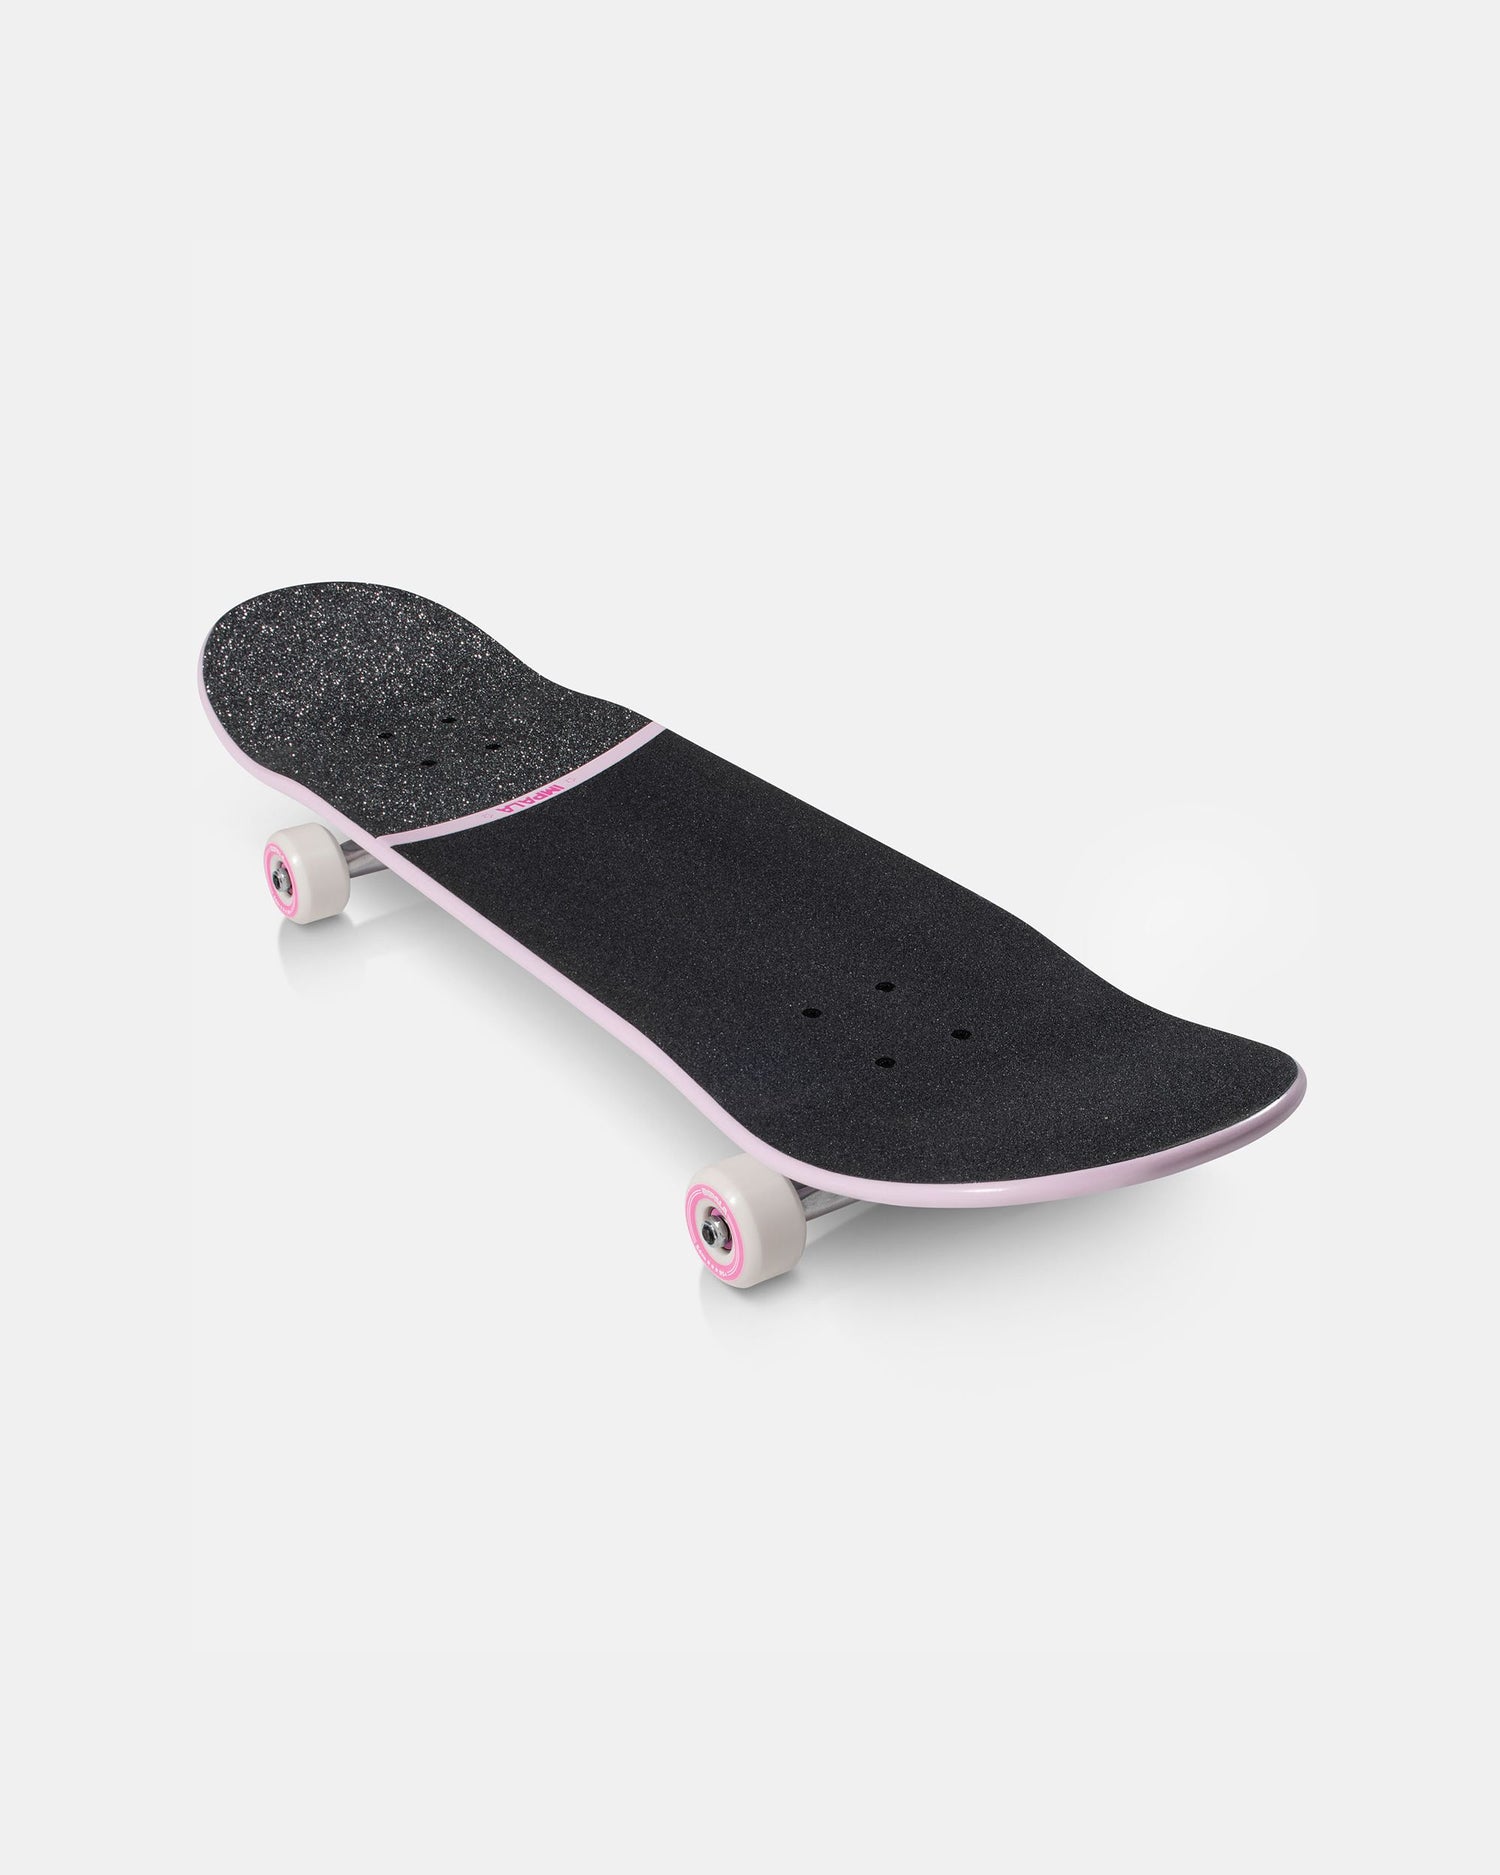 Front angled of Impala Cosmos Skateboard - Pink